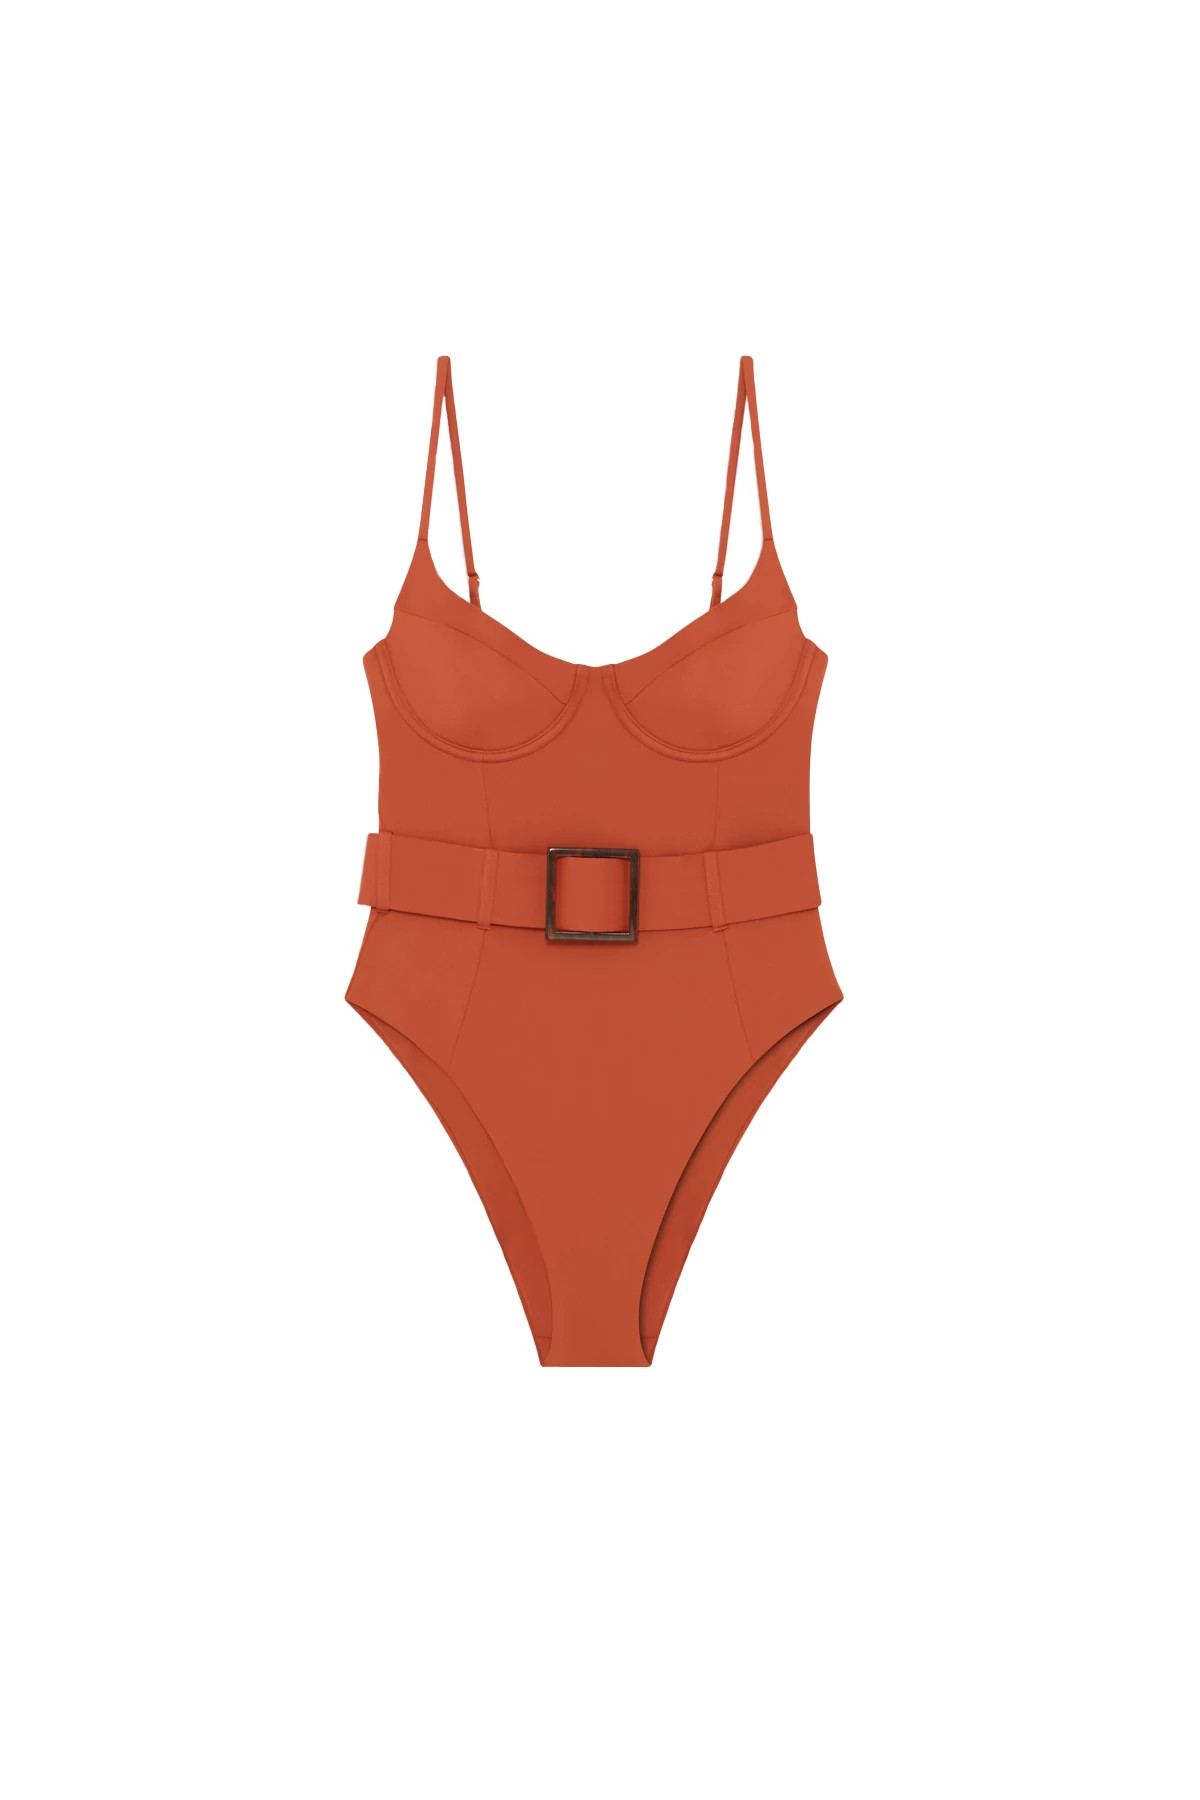 SAHARA Danielle One Piece Swimsuit image number 3